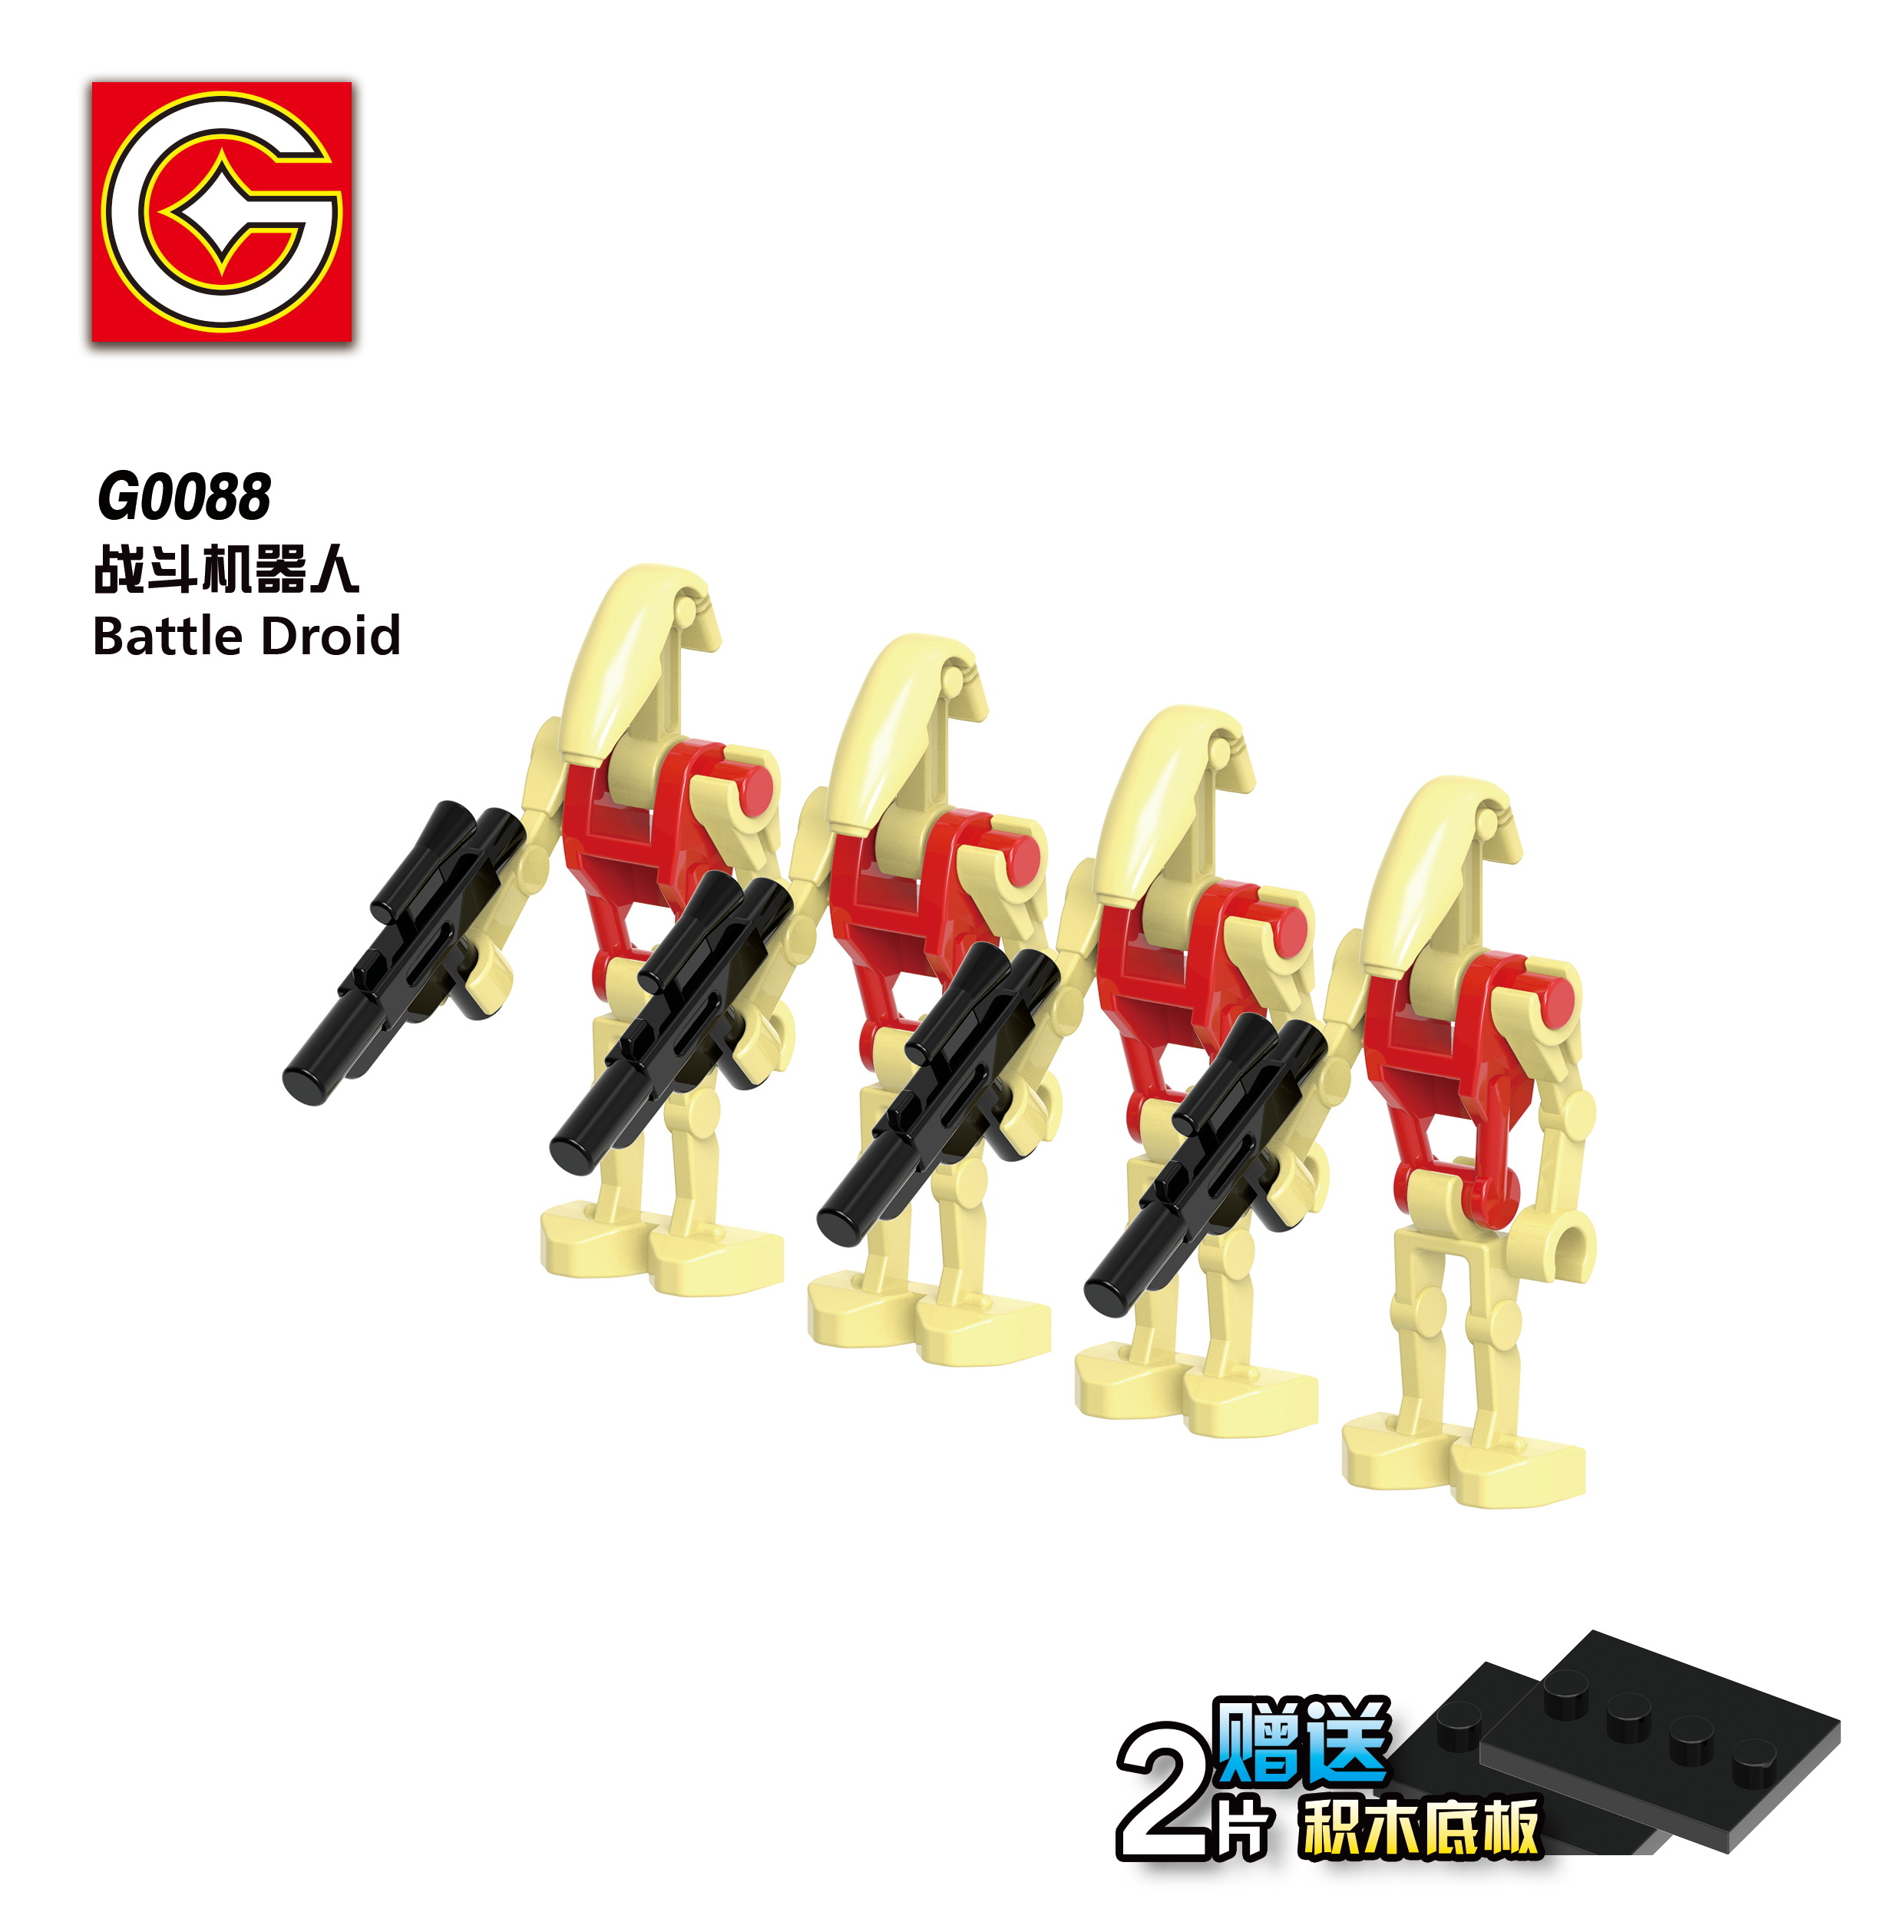 G0111 G0081 G0082 G0083 G0084 G0085 G0086 G0087 G0088 Star Wars Building Blocks War Machine Action Figures Educational Toys For Kids